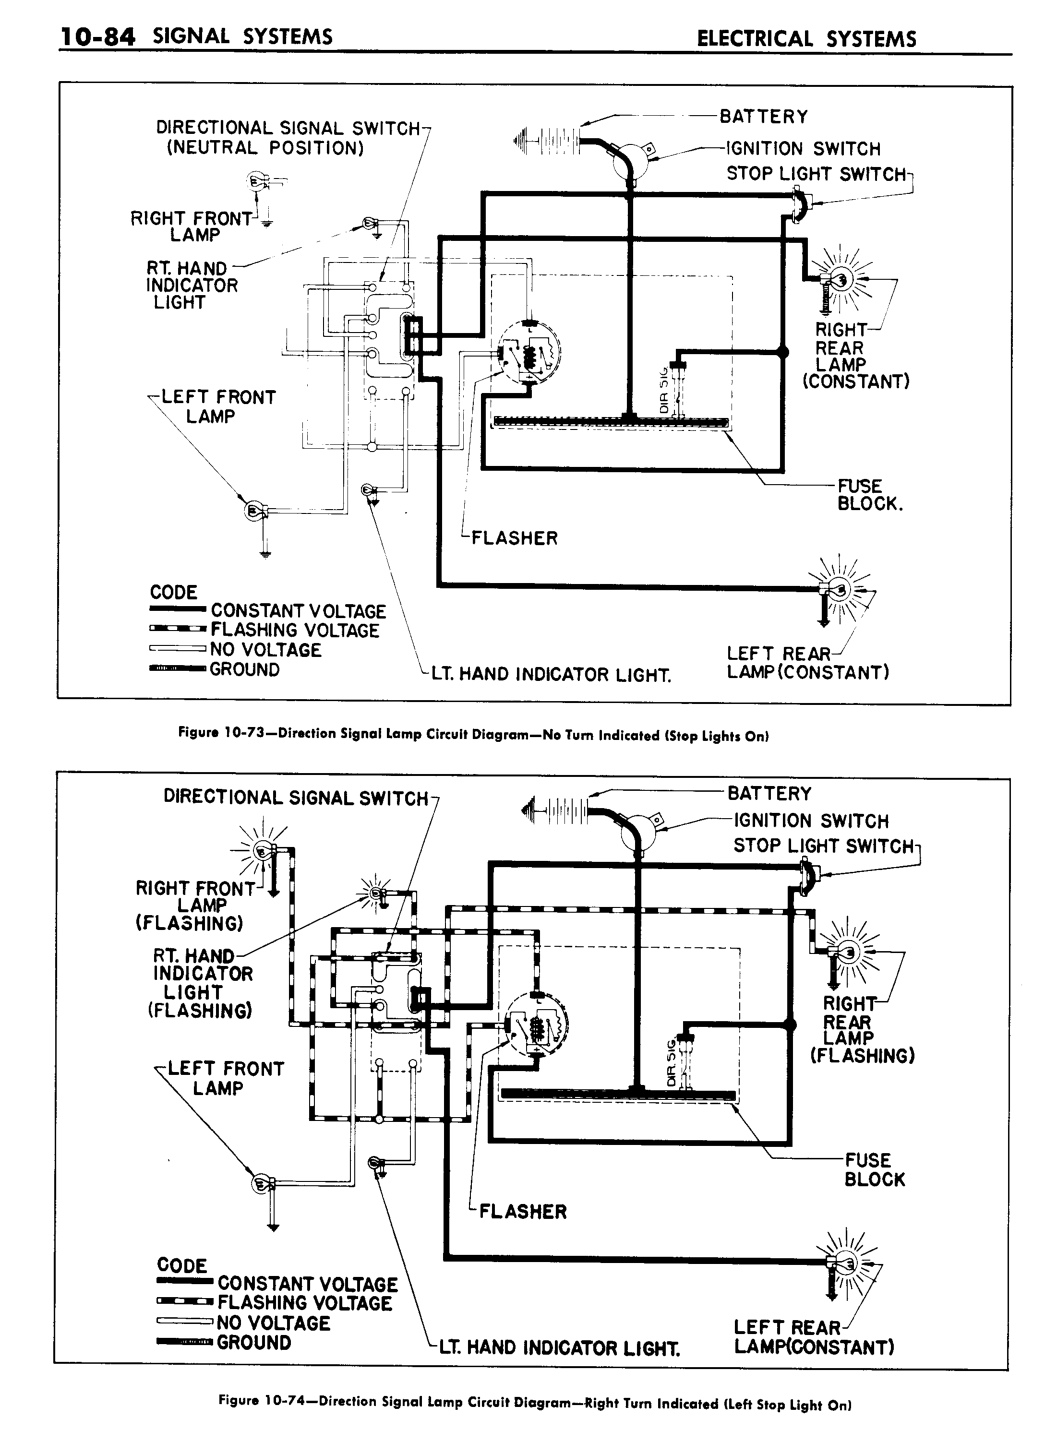 n_11 1960 Buick Shop Manual - Electrical Systems-084-084.jpg